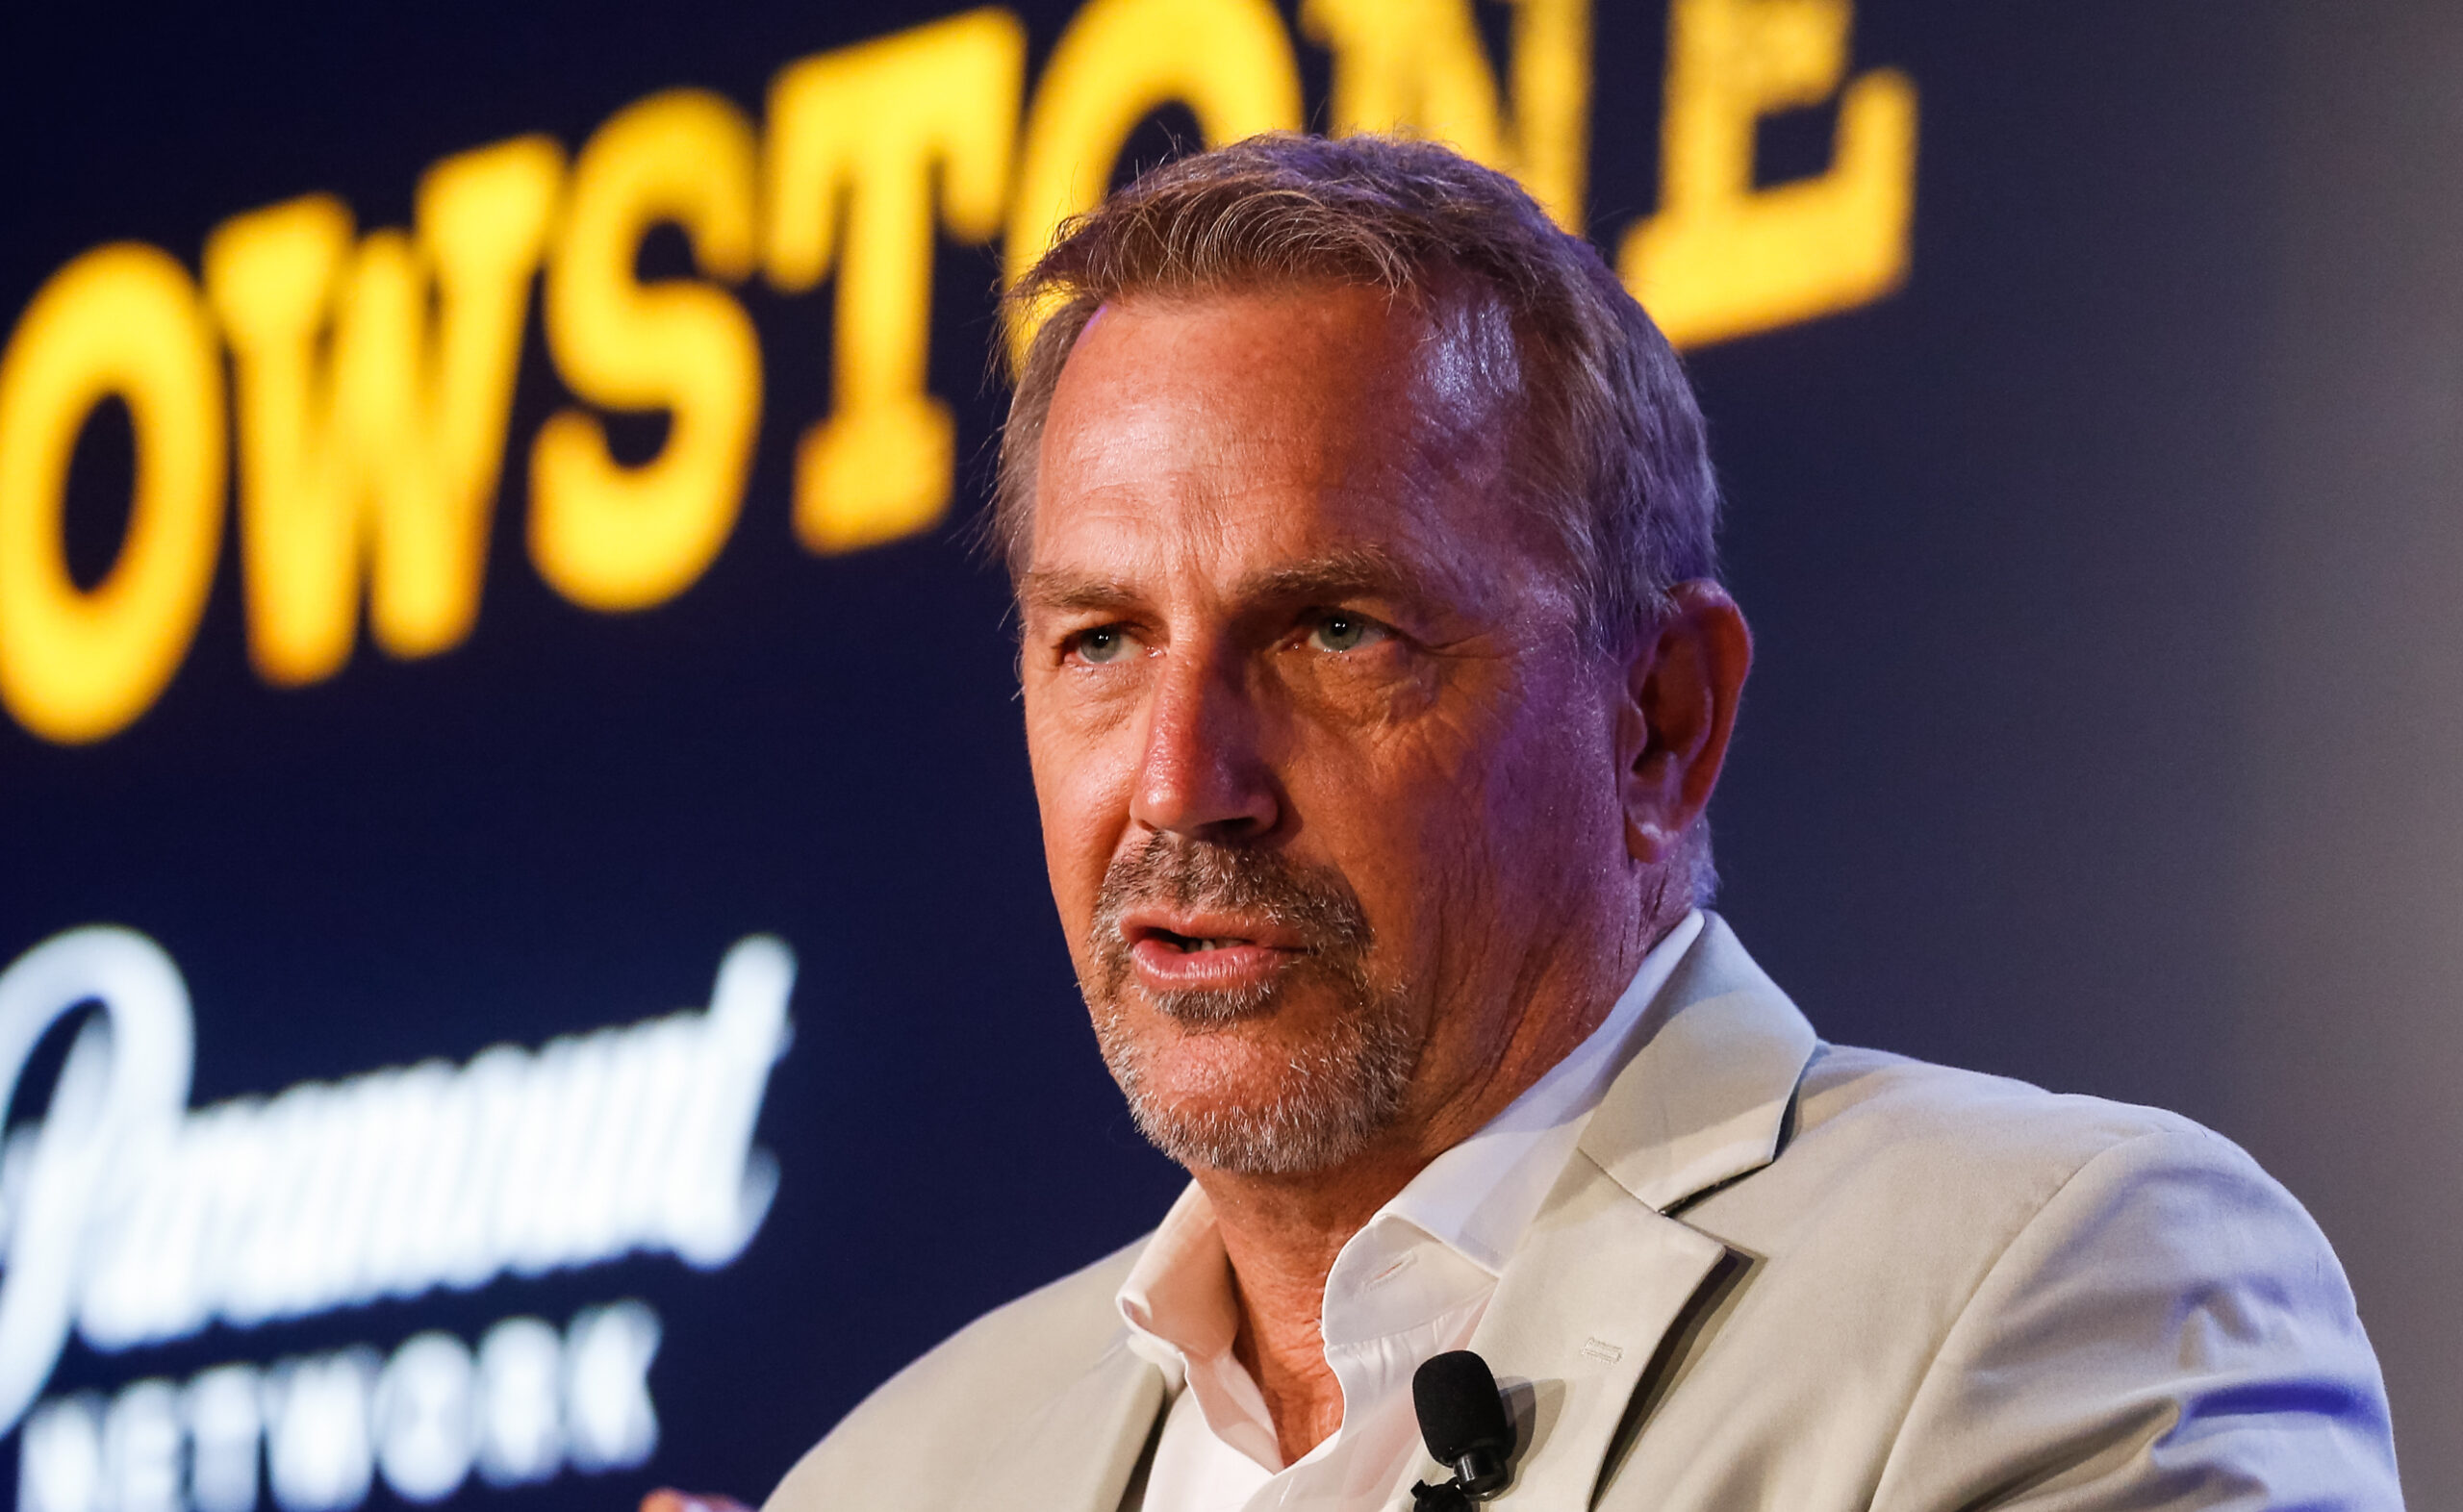 Kevin Costner Confirms He Will Not Return to ‘Yellowstone